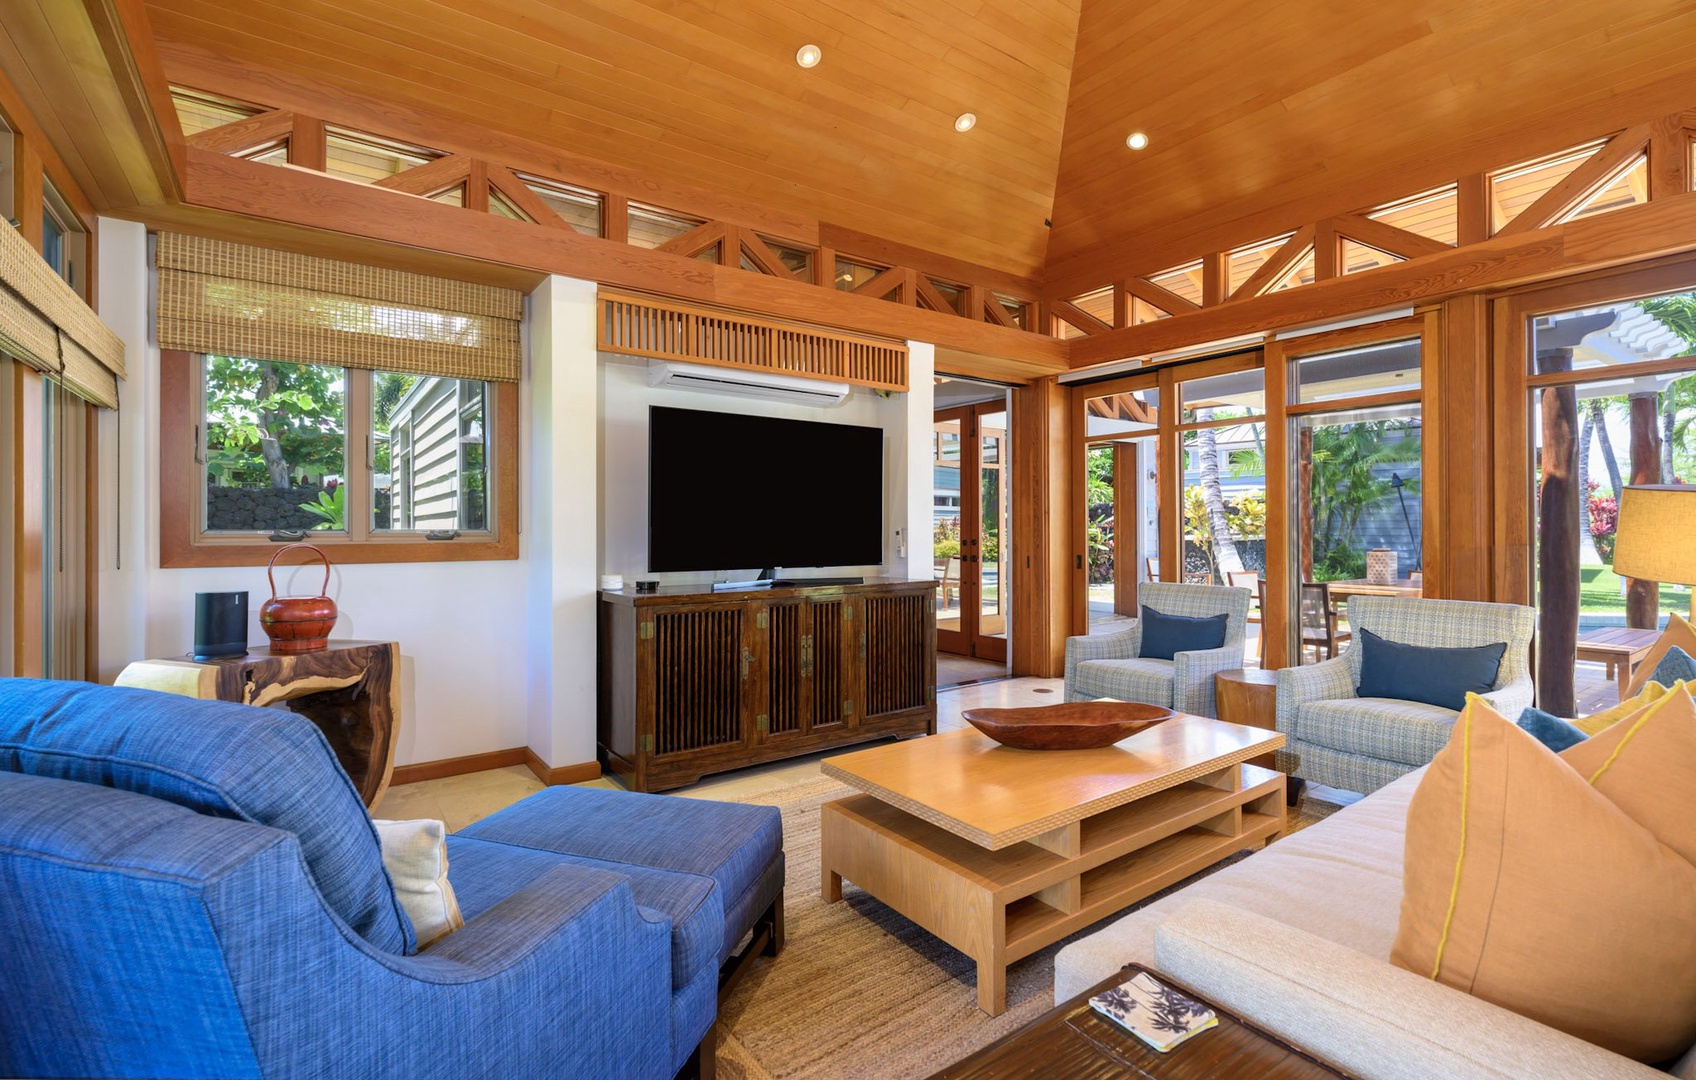 Kamuela Vacation Rentals, 3BD Na Hale 3 at Pauoa Beach Club at Mauna Lani Resort - Bright and airy living area with expansive windows and sliding doors that fill the room with natural light.